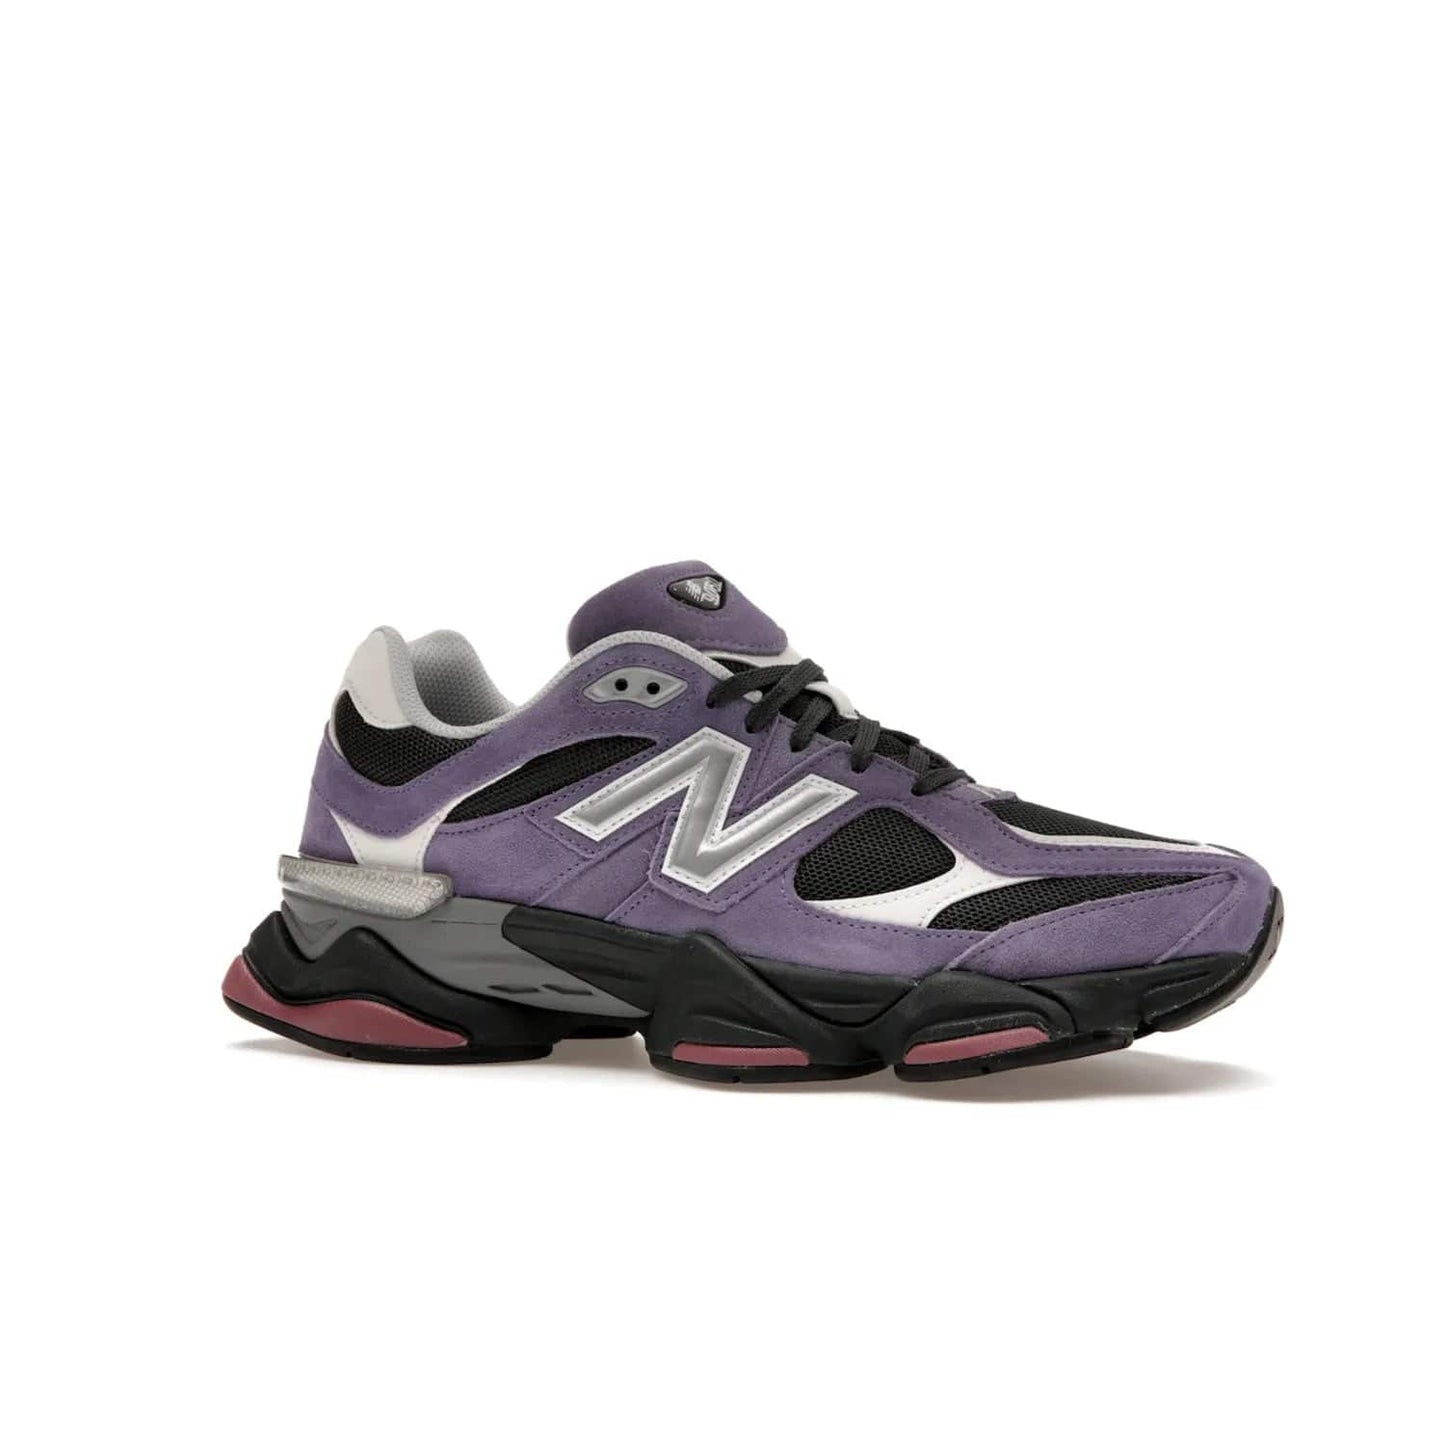 New Balance 9060 Violet Noir - Image 3 - Only at www.BallersClubKickz.com - Experience urban exploration in stylish comfort with the New Balance 9060 Violet Noir. Crafted with an exquisite blend of colors, this pair is perfect for an adventurous city stroll or casual hangouts. Enjoy all-day comfort and make a statement with the New Balance 9060 Violet Noir.